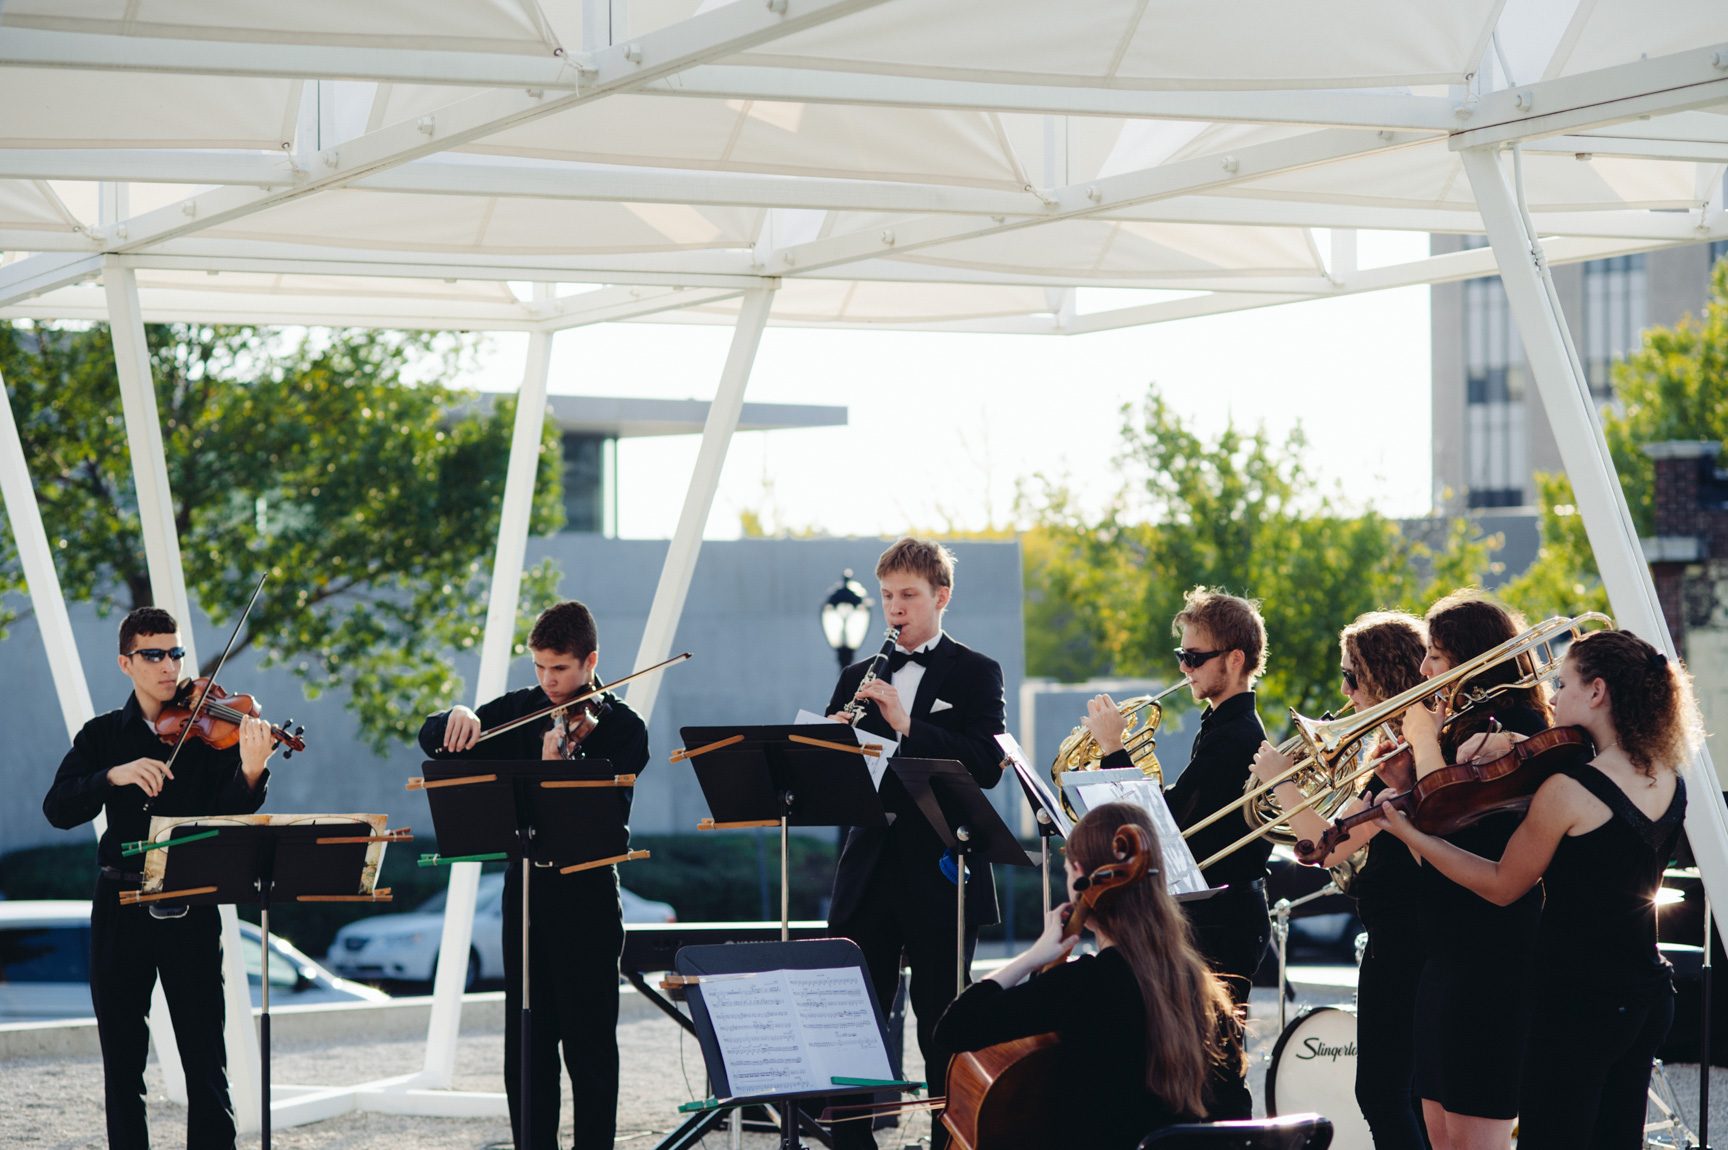 Student musicians perform outdoors under the Lots installation.